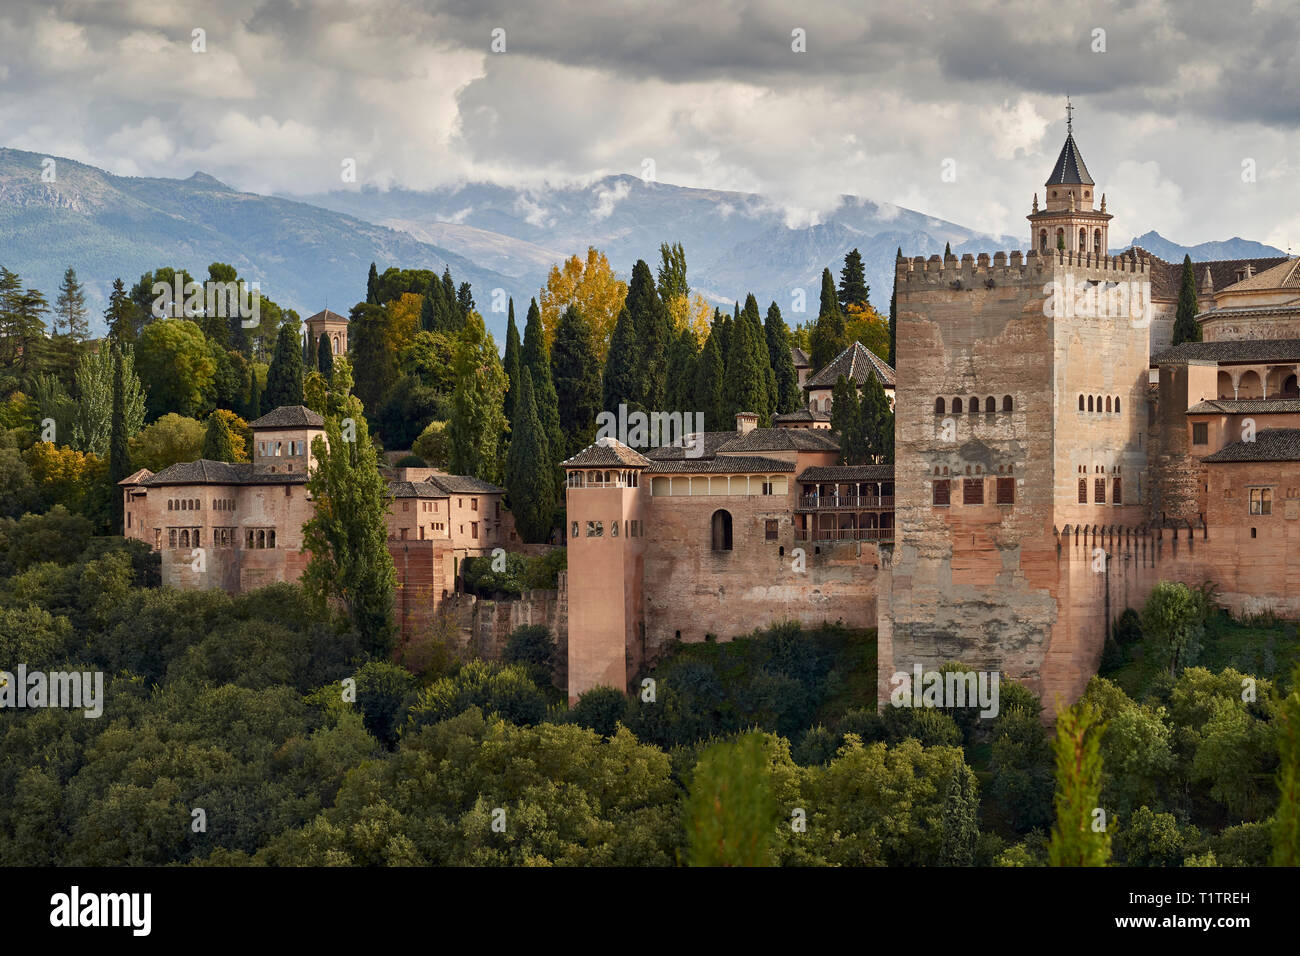 SPAIN ANDALUSIA GRANADA THE ALHAMBRA THE STEEPLE WITH BELLS AND THE CASTLE WALLS Stock Photo